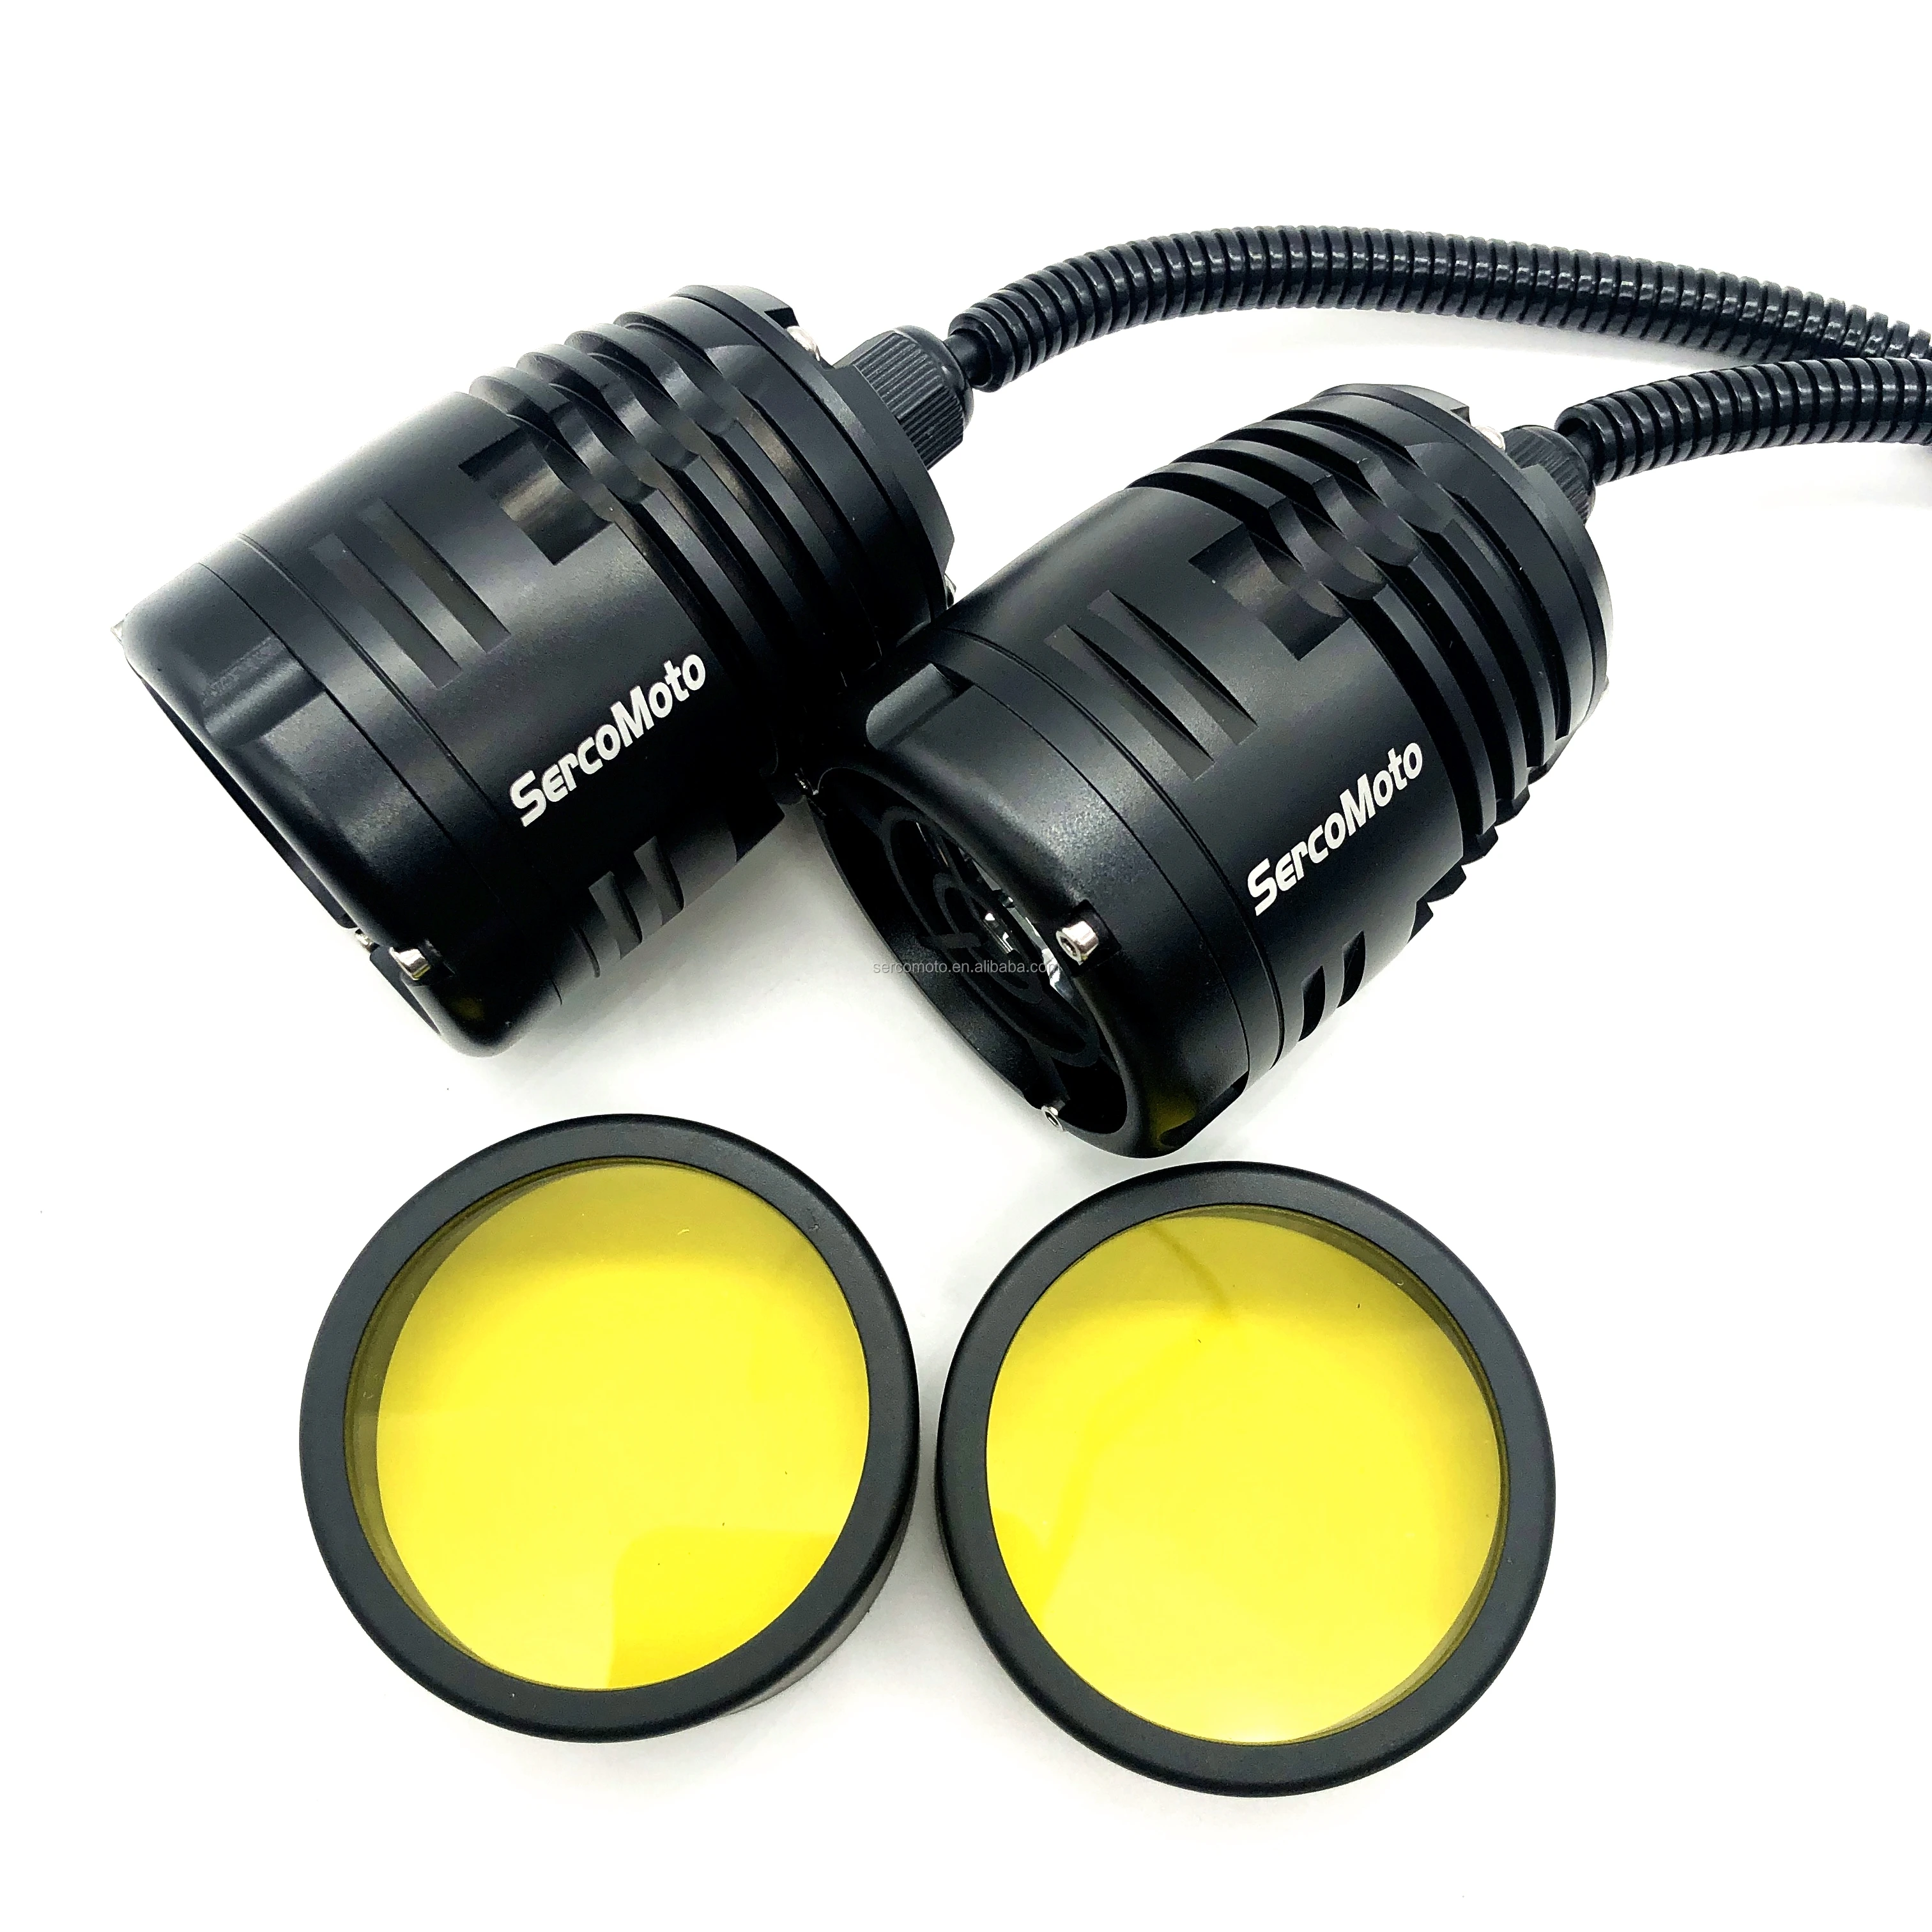 Sercomoto SM1171 25w round universal motorcycle led auxiliary light for r1200gs/Monster796/GTR1400/FJR1300/K1600GT/HP2/Megamoto